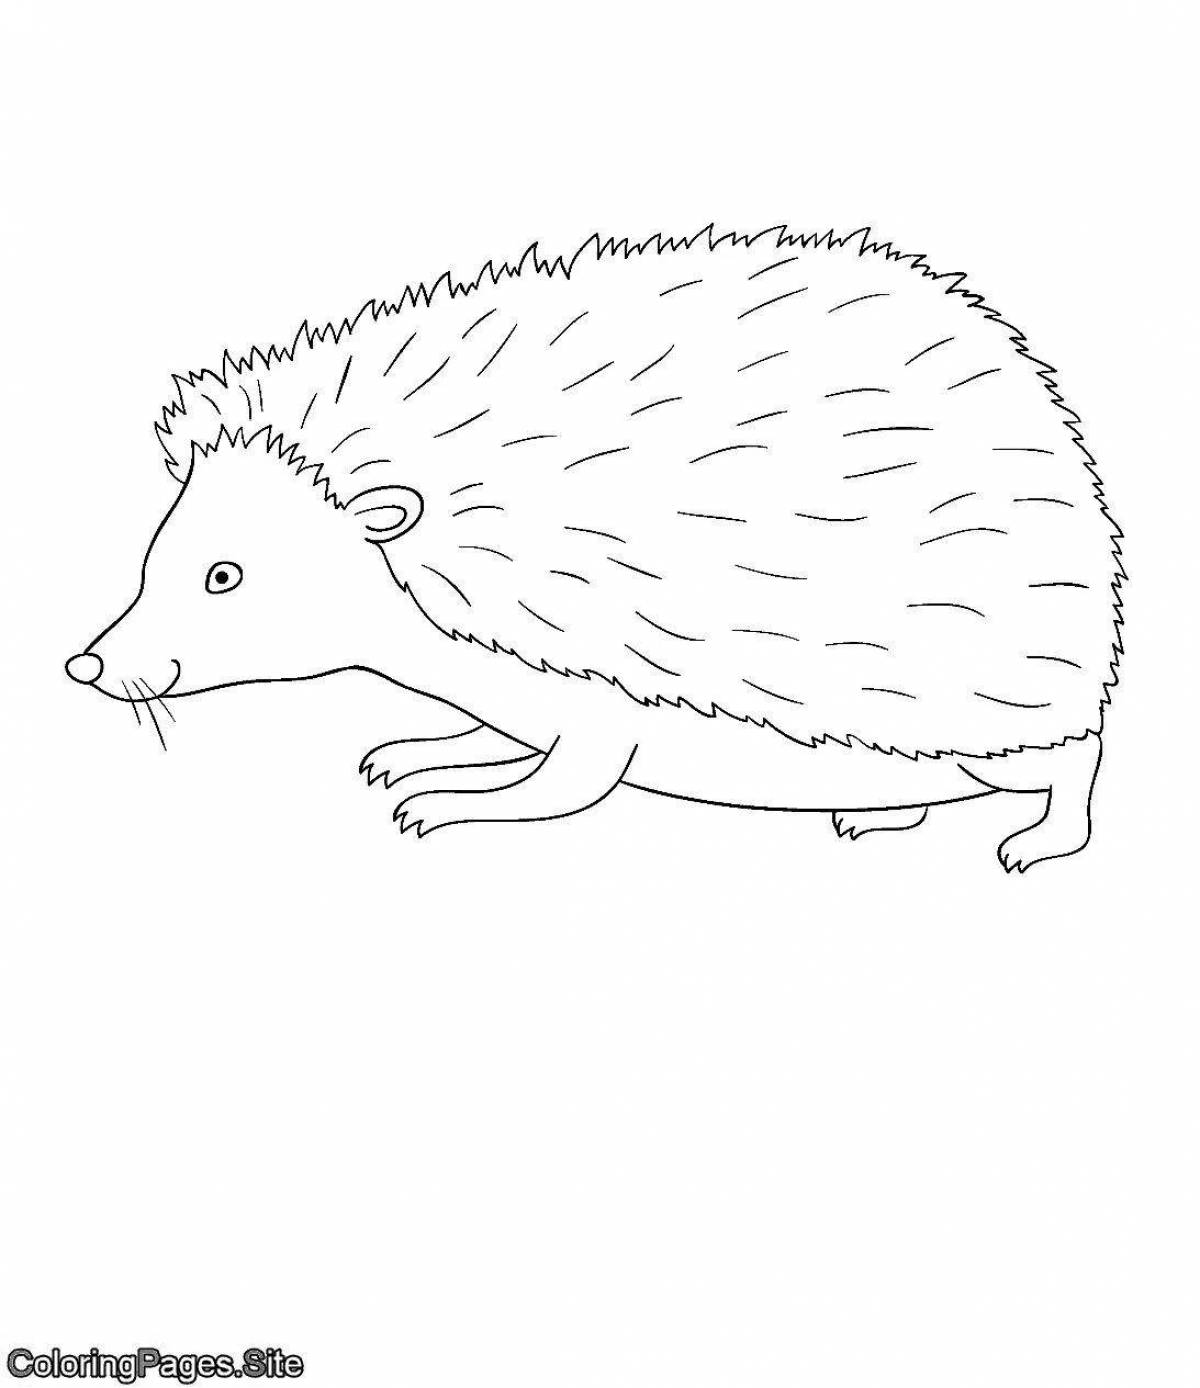 Humorous coloring hedgehog without thorns